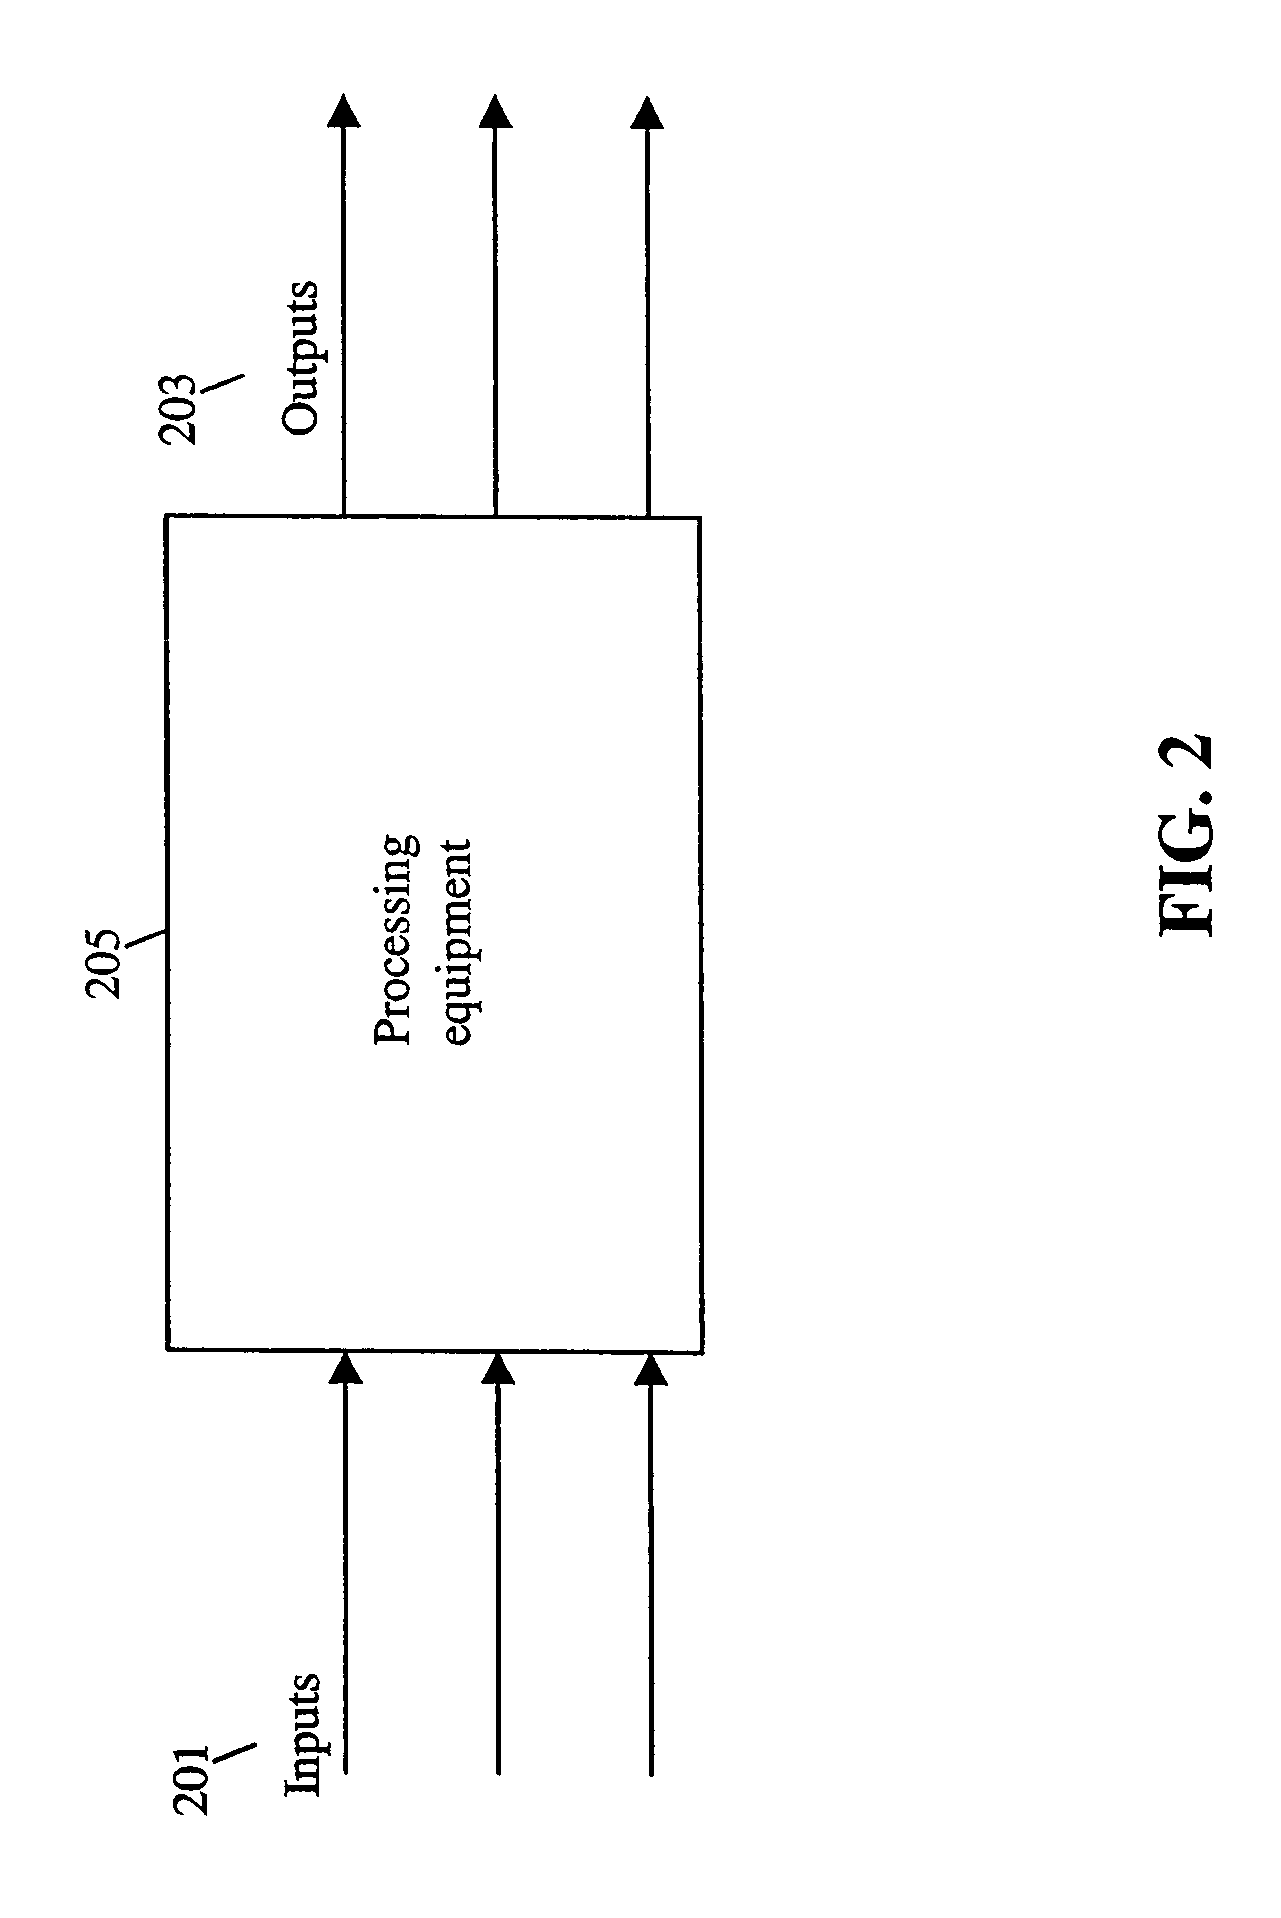 Method, system and medium for controlling manufacture process having multivariate input parameters